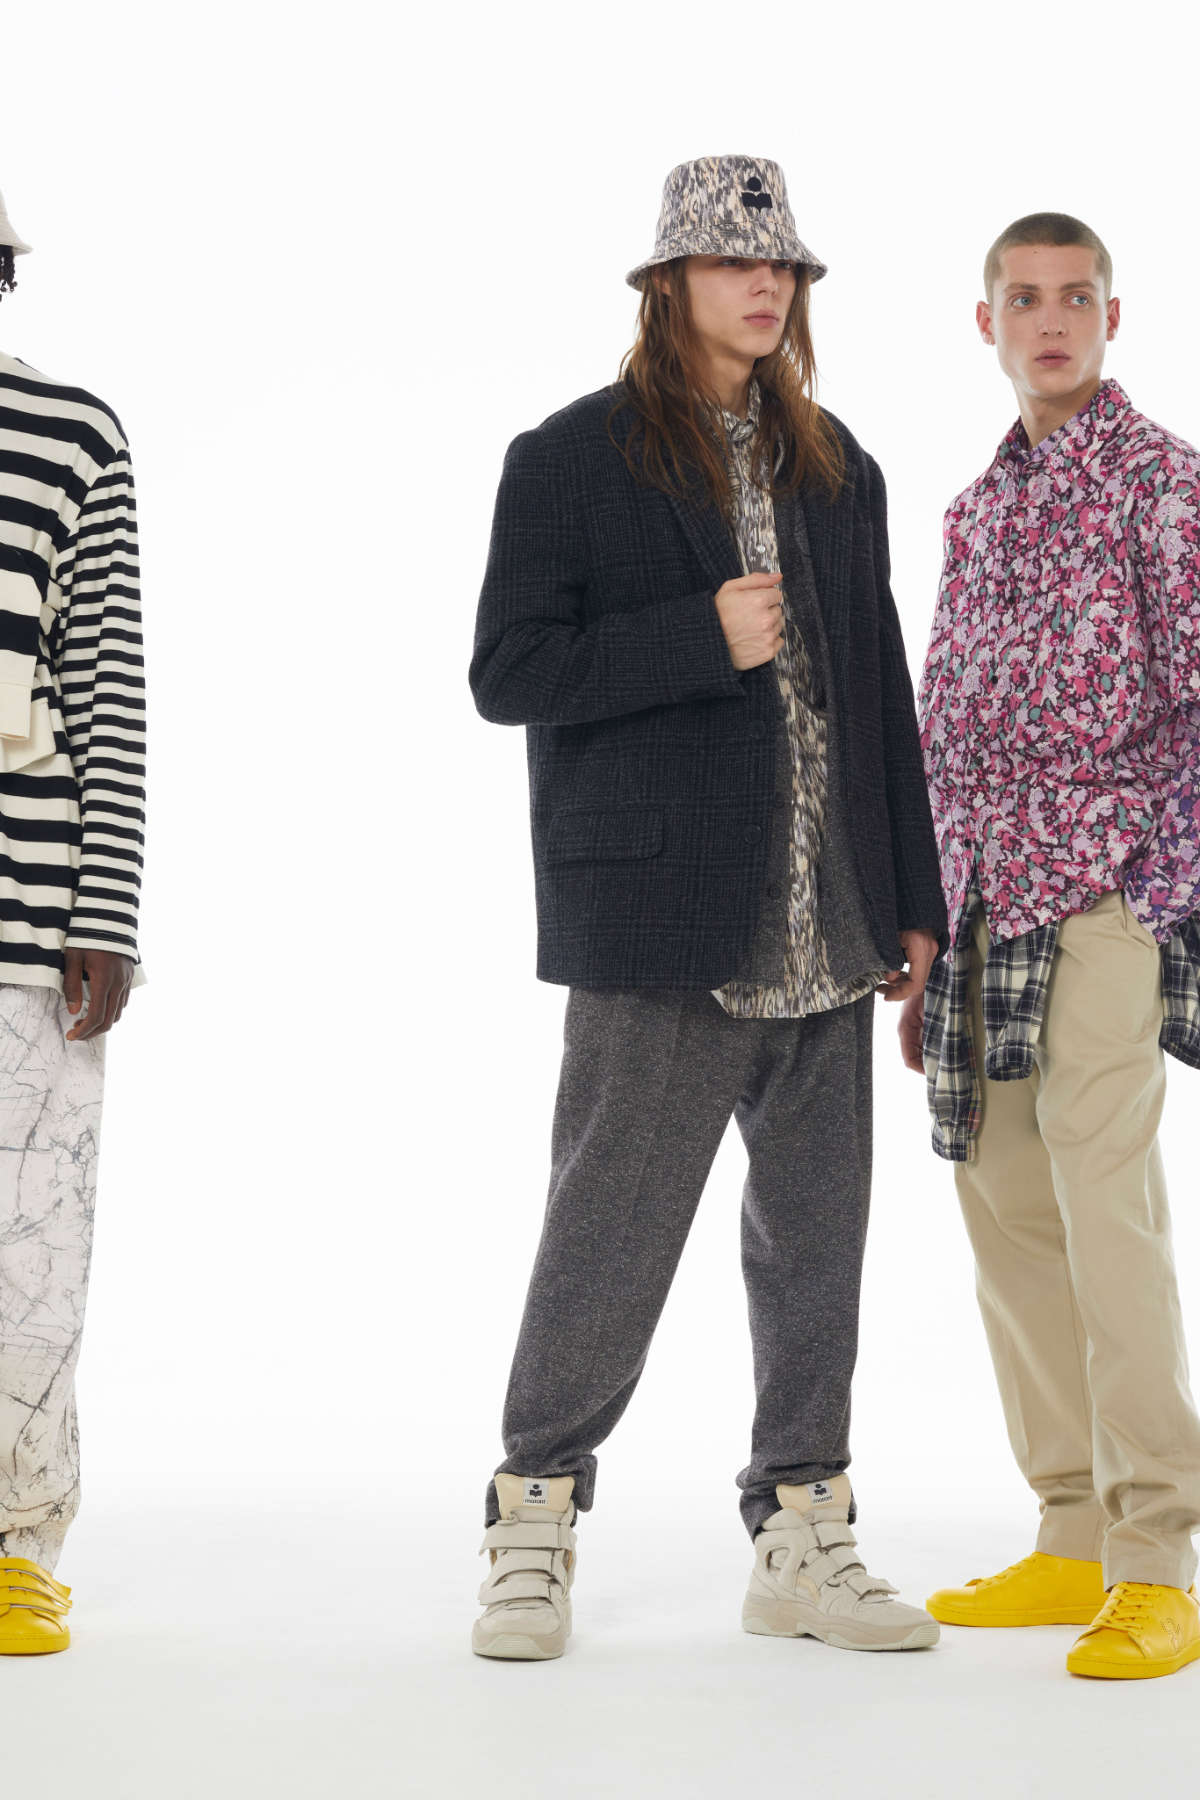 Isabel Marant Presents Its New Autumn-Winter 2022 Menswear Collection